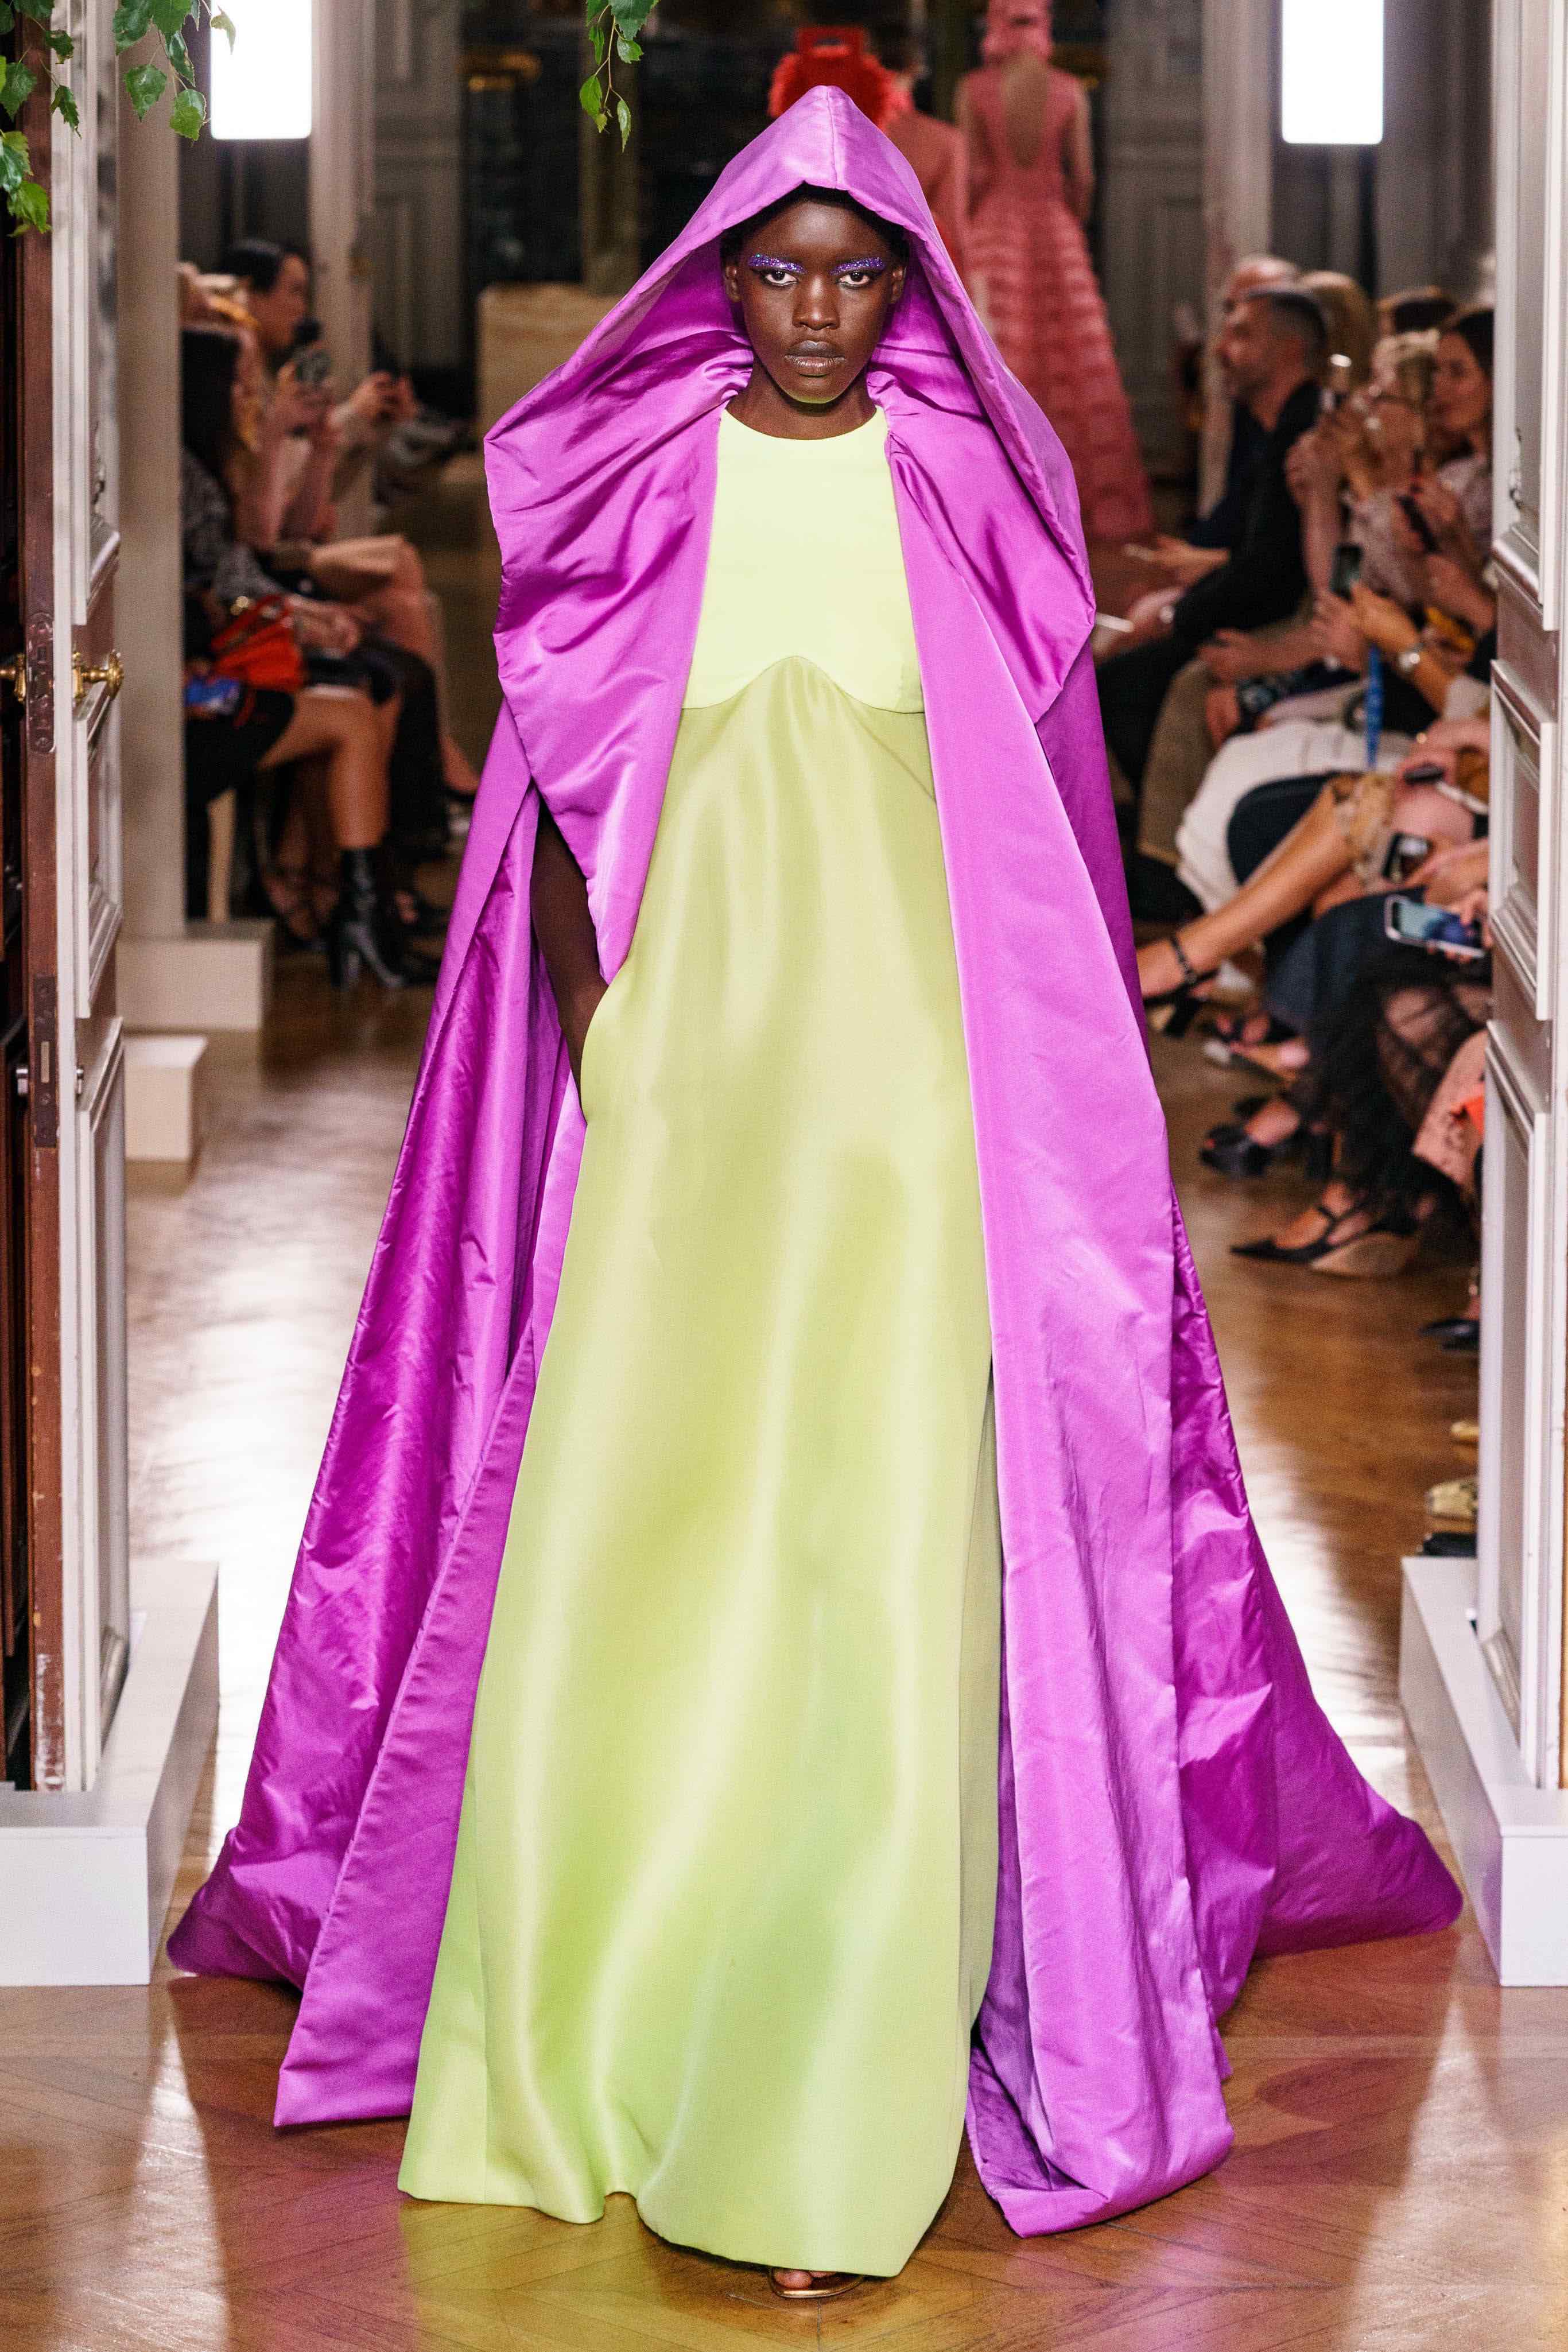 At søge tilflugt Juice Isolere Pierpaolo Piccioli's Autumn/Winter 2019 Haute Couture Collection for  Valentino Proves Once Again he is the Master of Couture - A&E Magazine